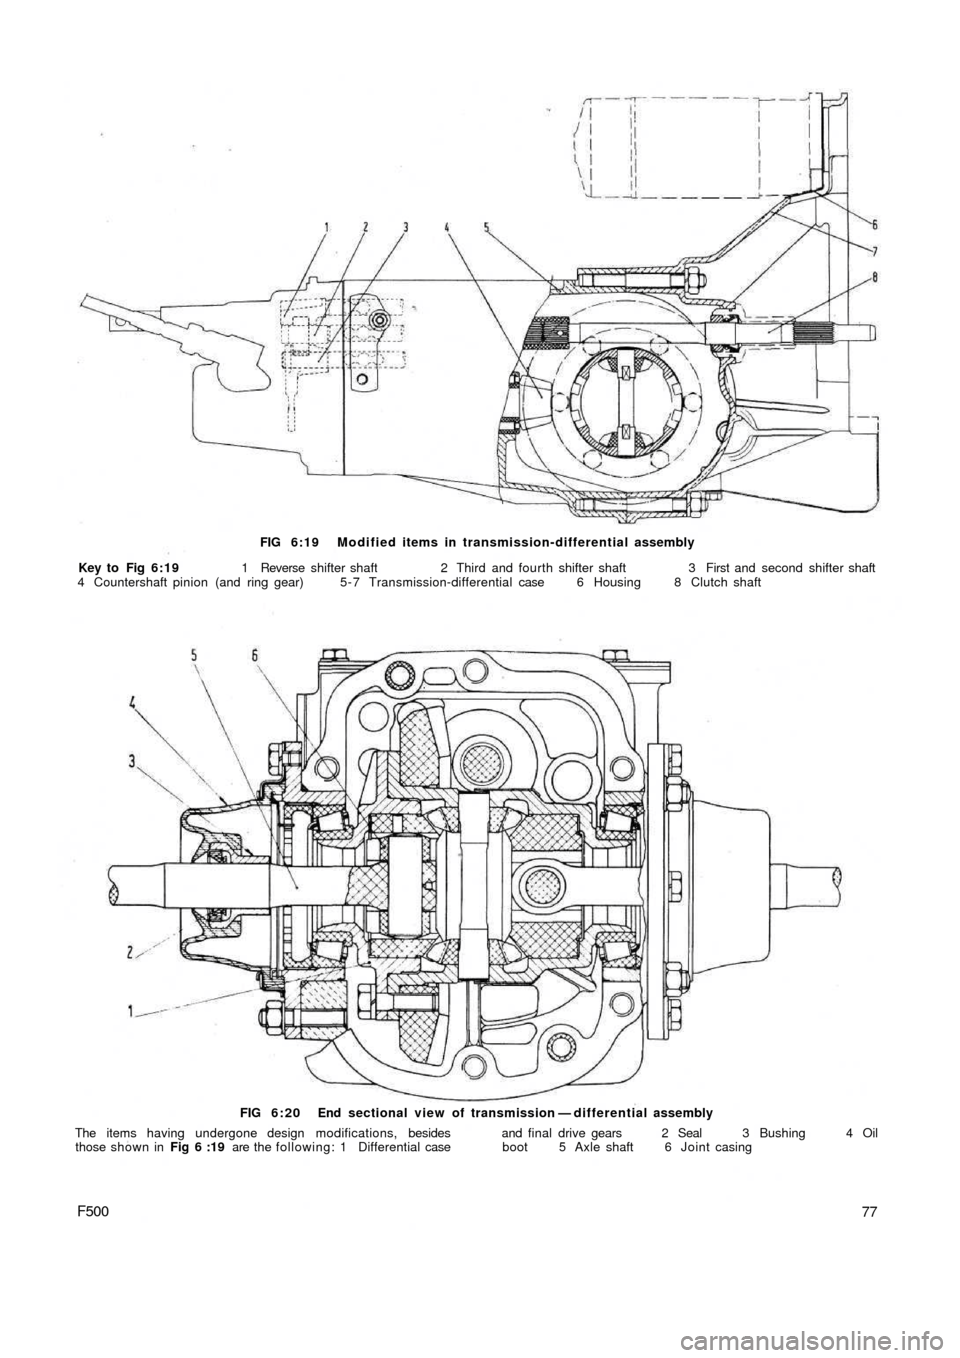 FIAT 500 1970 1.G Repair Manual FIG 6:19 Modified items in transmission-differential assembly
Key to  Fig  6:19 1 Reverse shifter shaft  2 Third and fourth shifter shaft  3 First and second shifter shaft
4 Countershaft pinion (and r